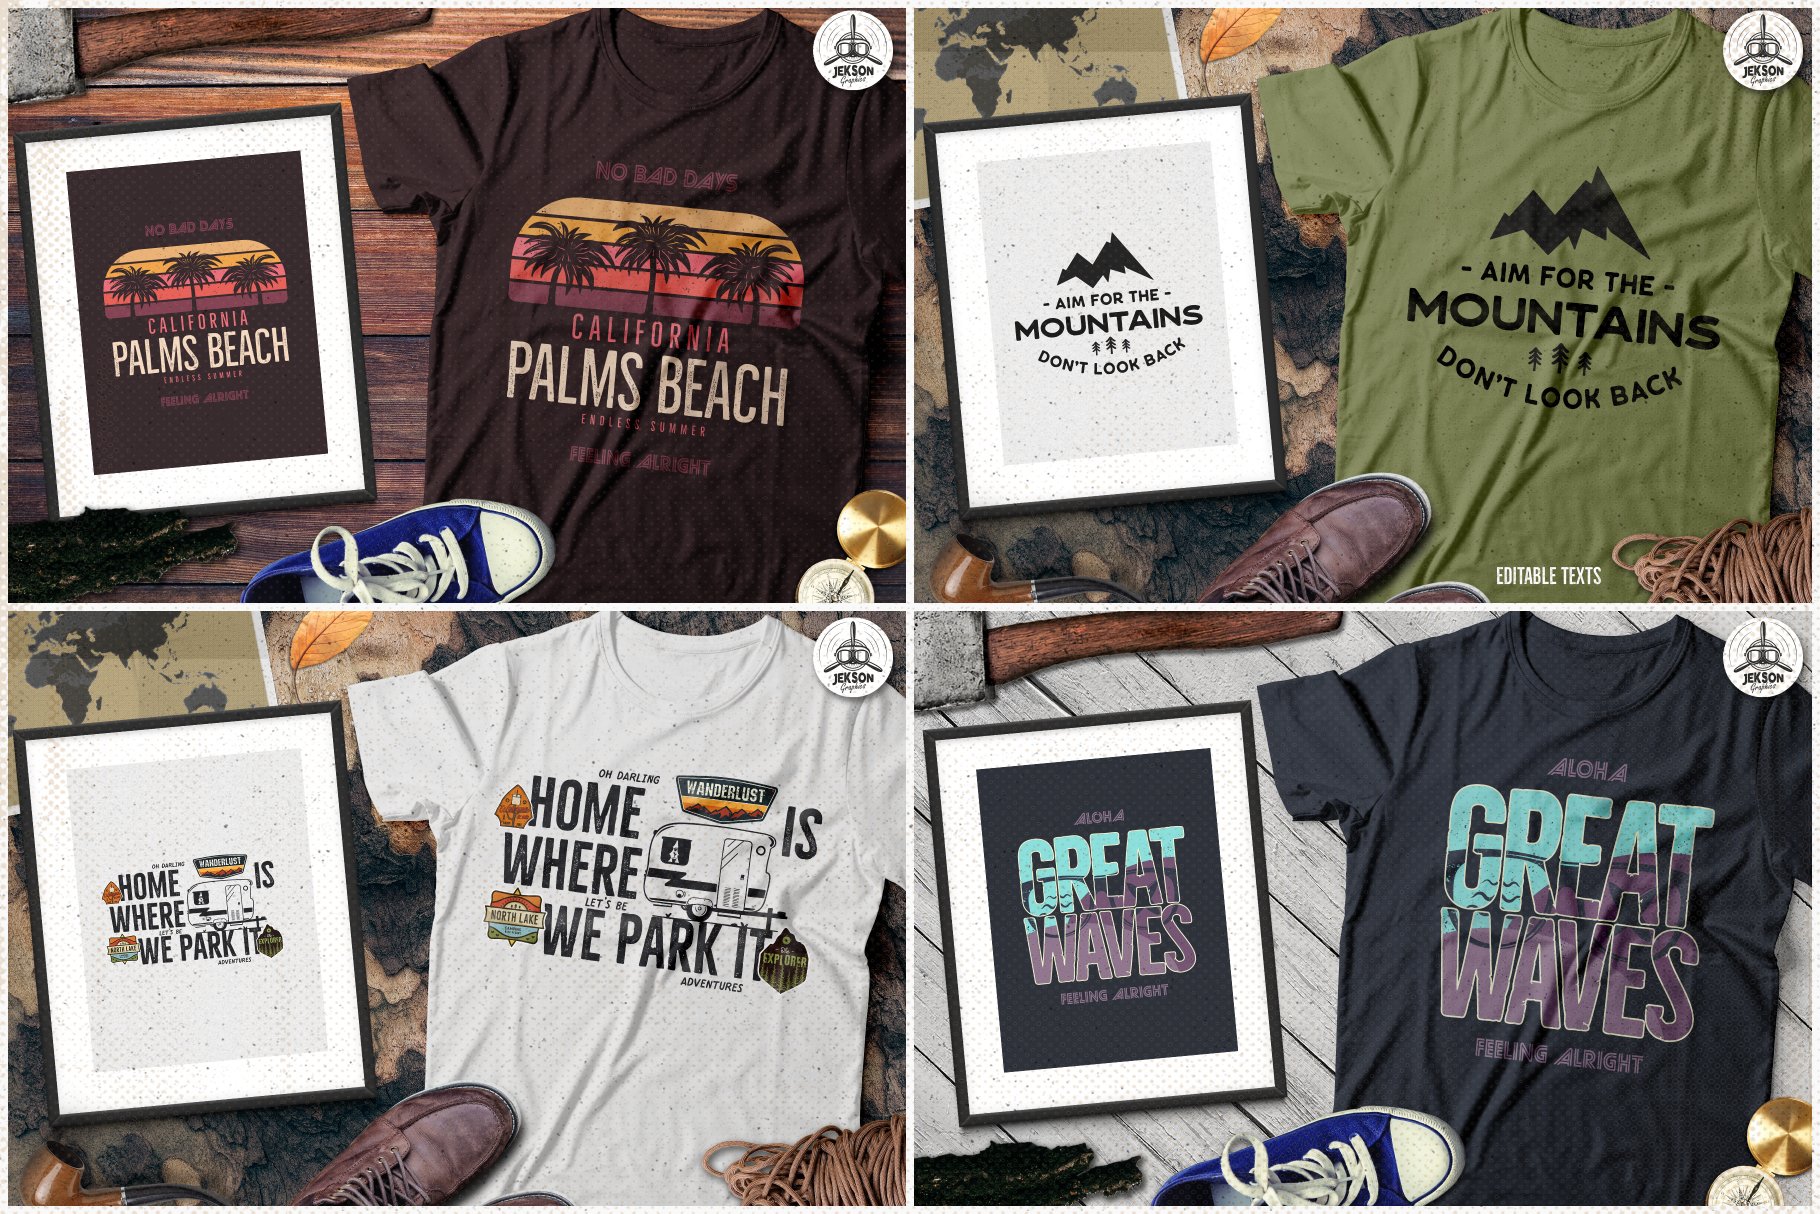 Use this collection for camping t-shirts.